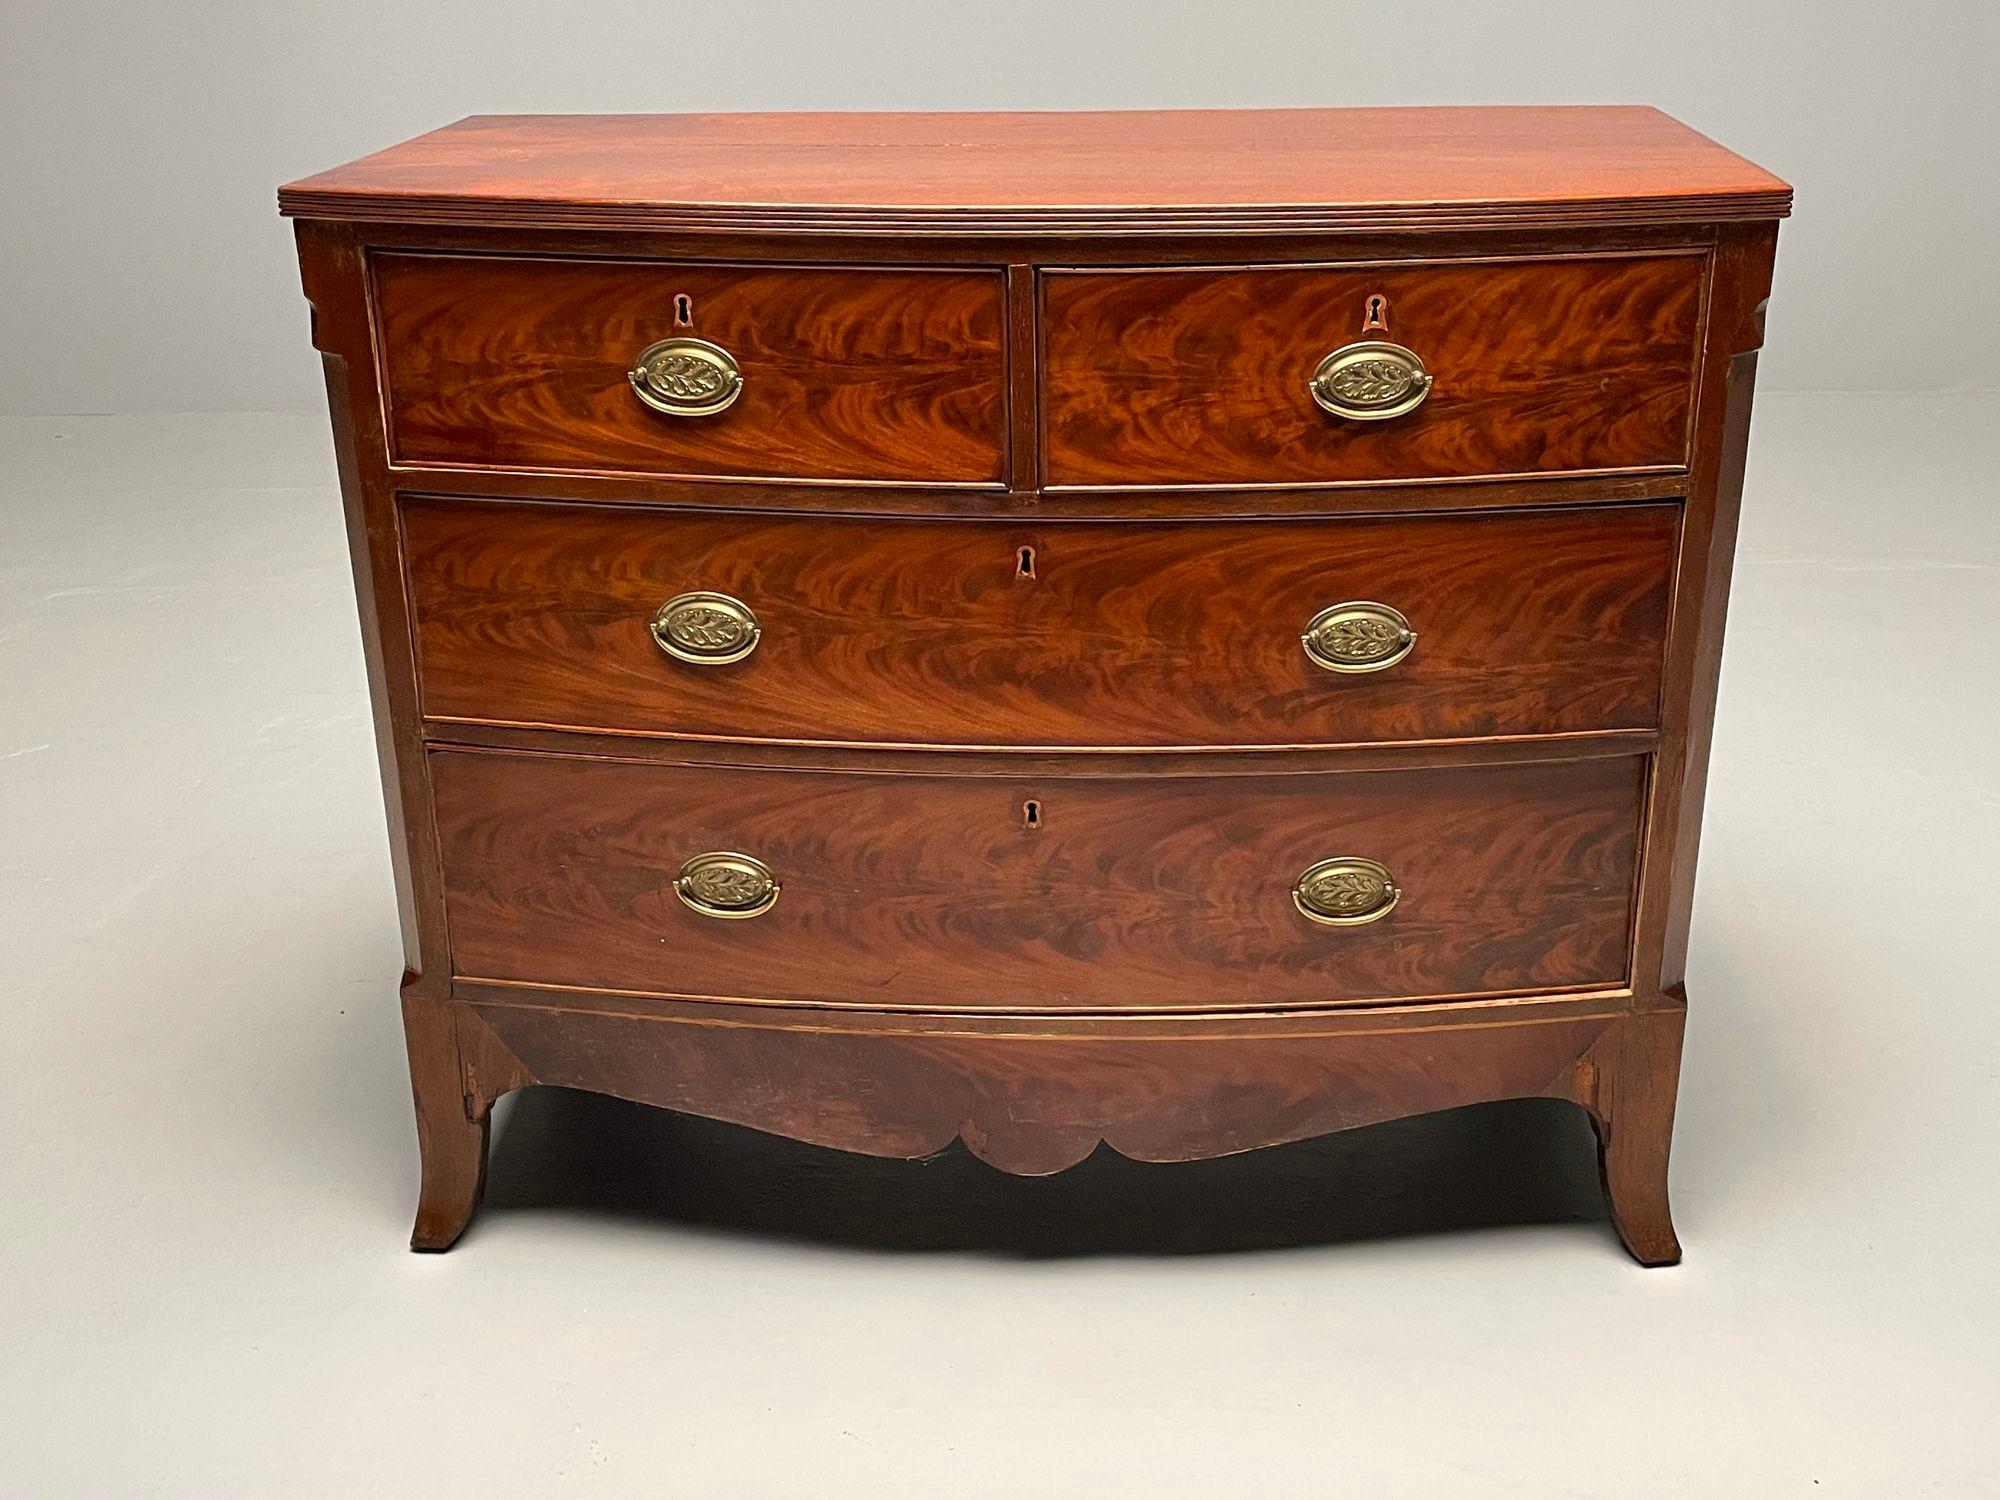 19th Century Georgian Flame Mahogany Bow Front Commode / Chest of Drawers or Nightstand

A fine example of a two over two chest having its original hardward and sprayed legs. Good condition with some minor veener restoration, stratches and the like